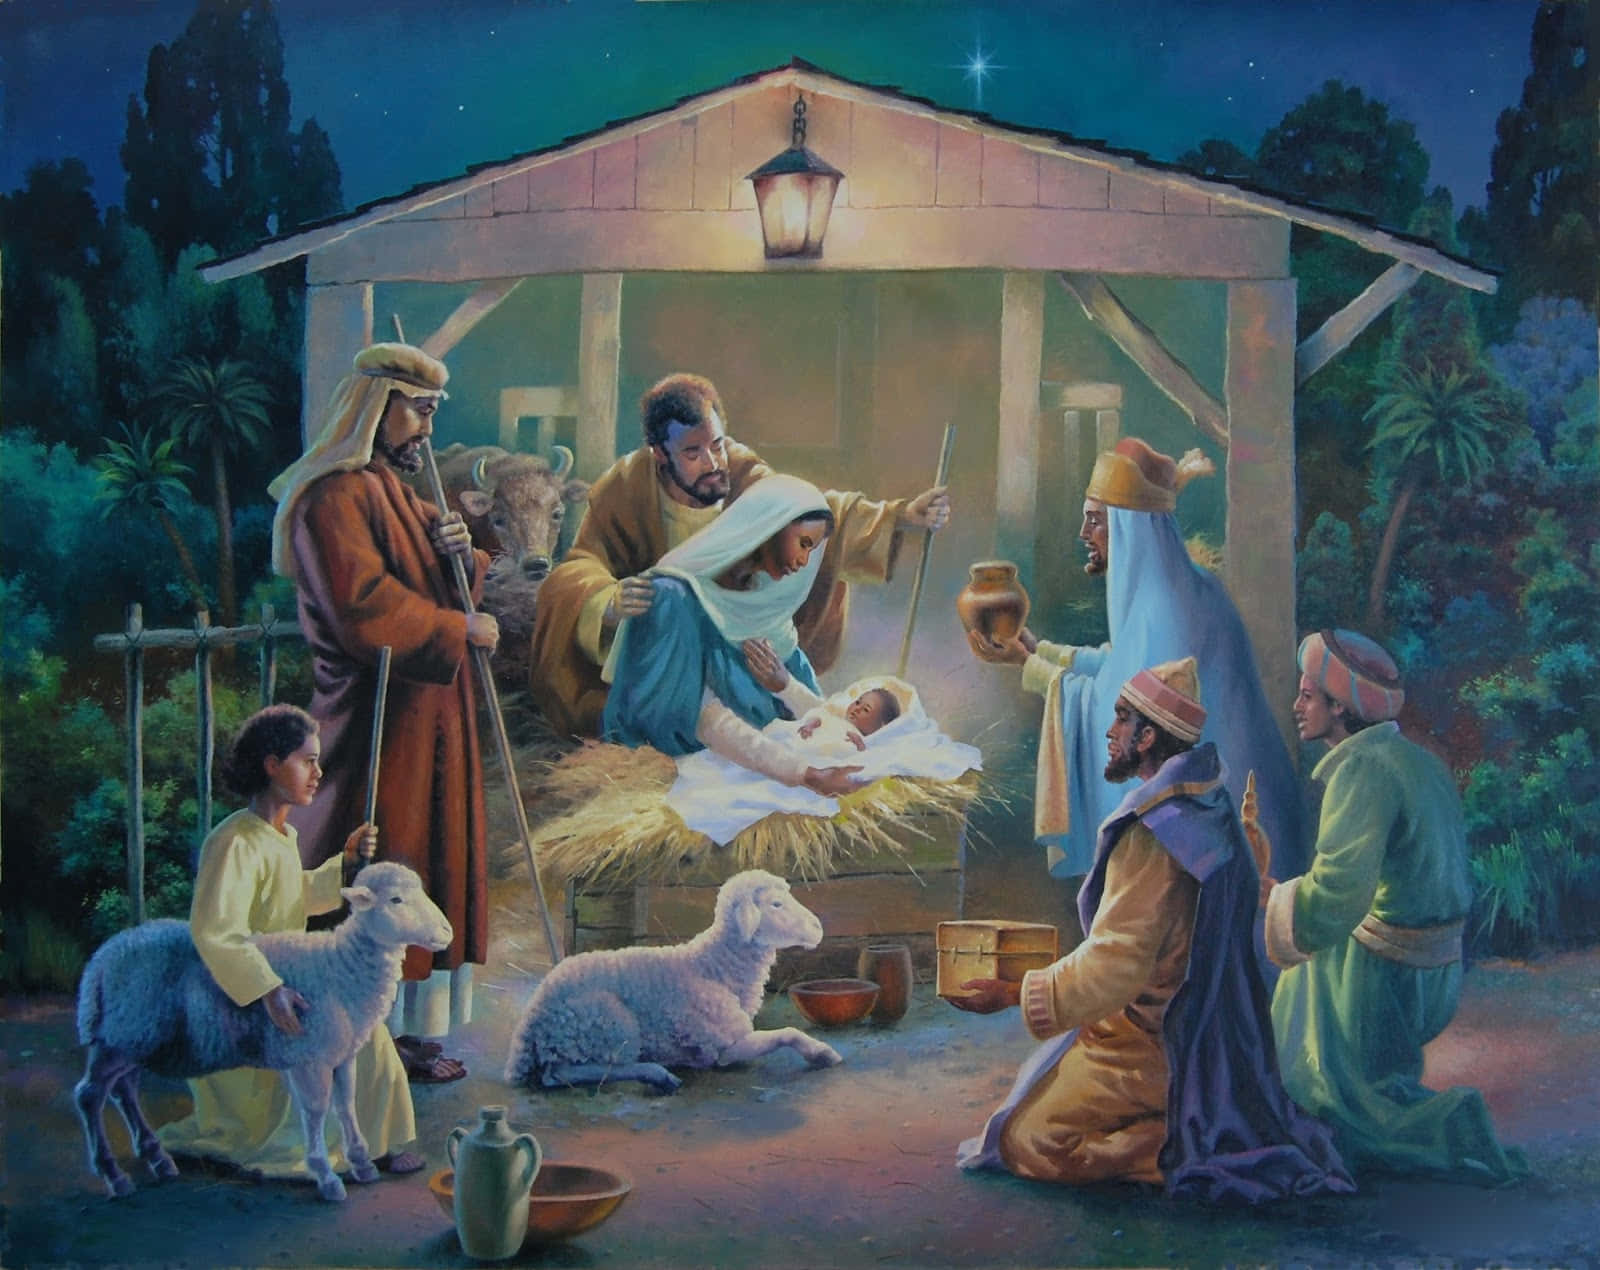 Christmas miracle of the Nativity